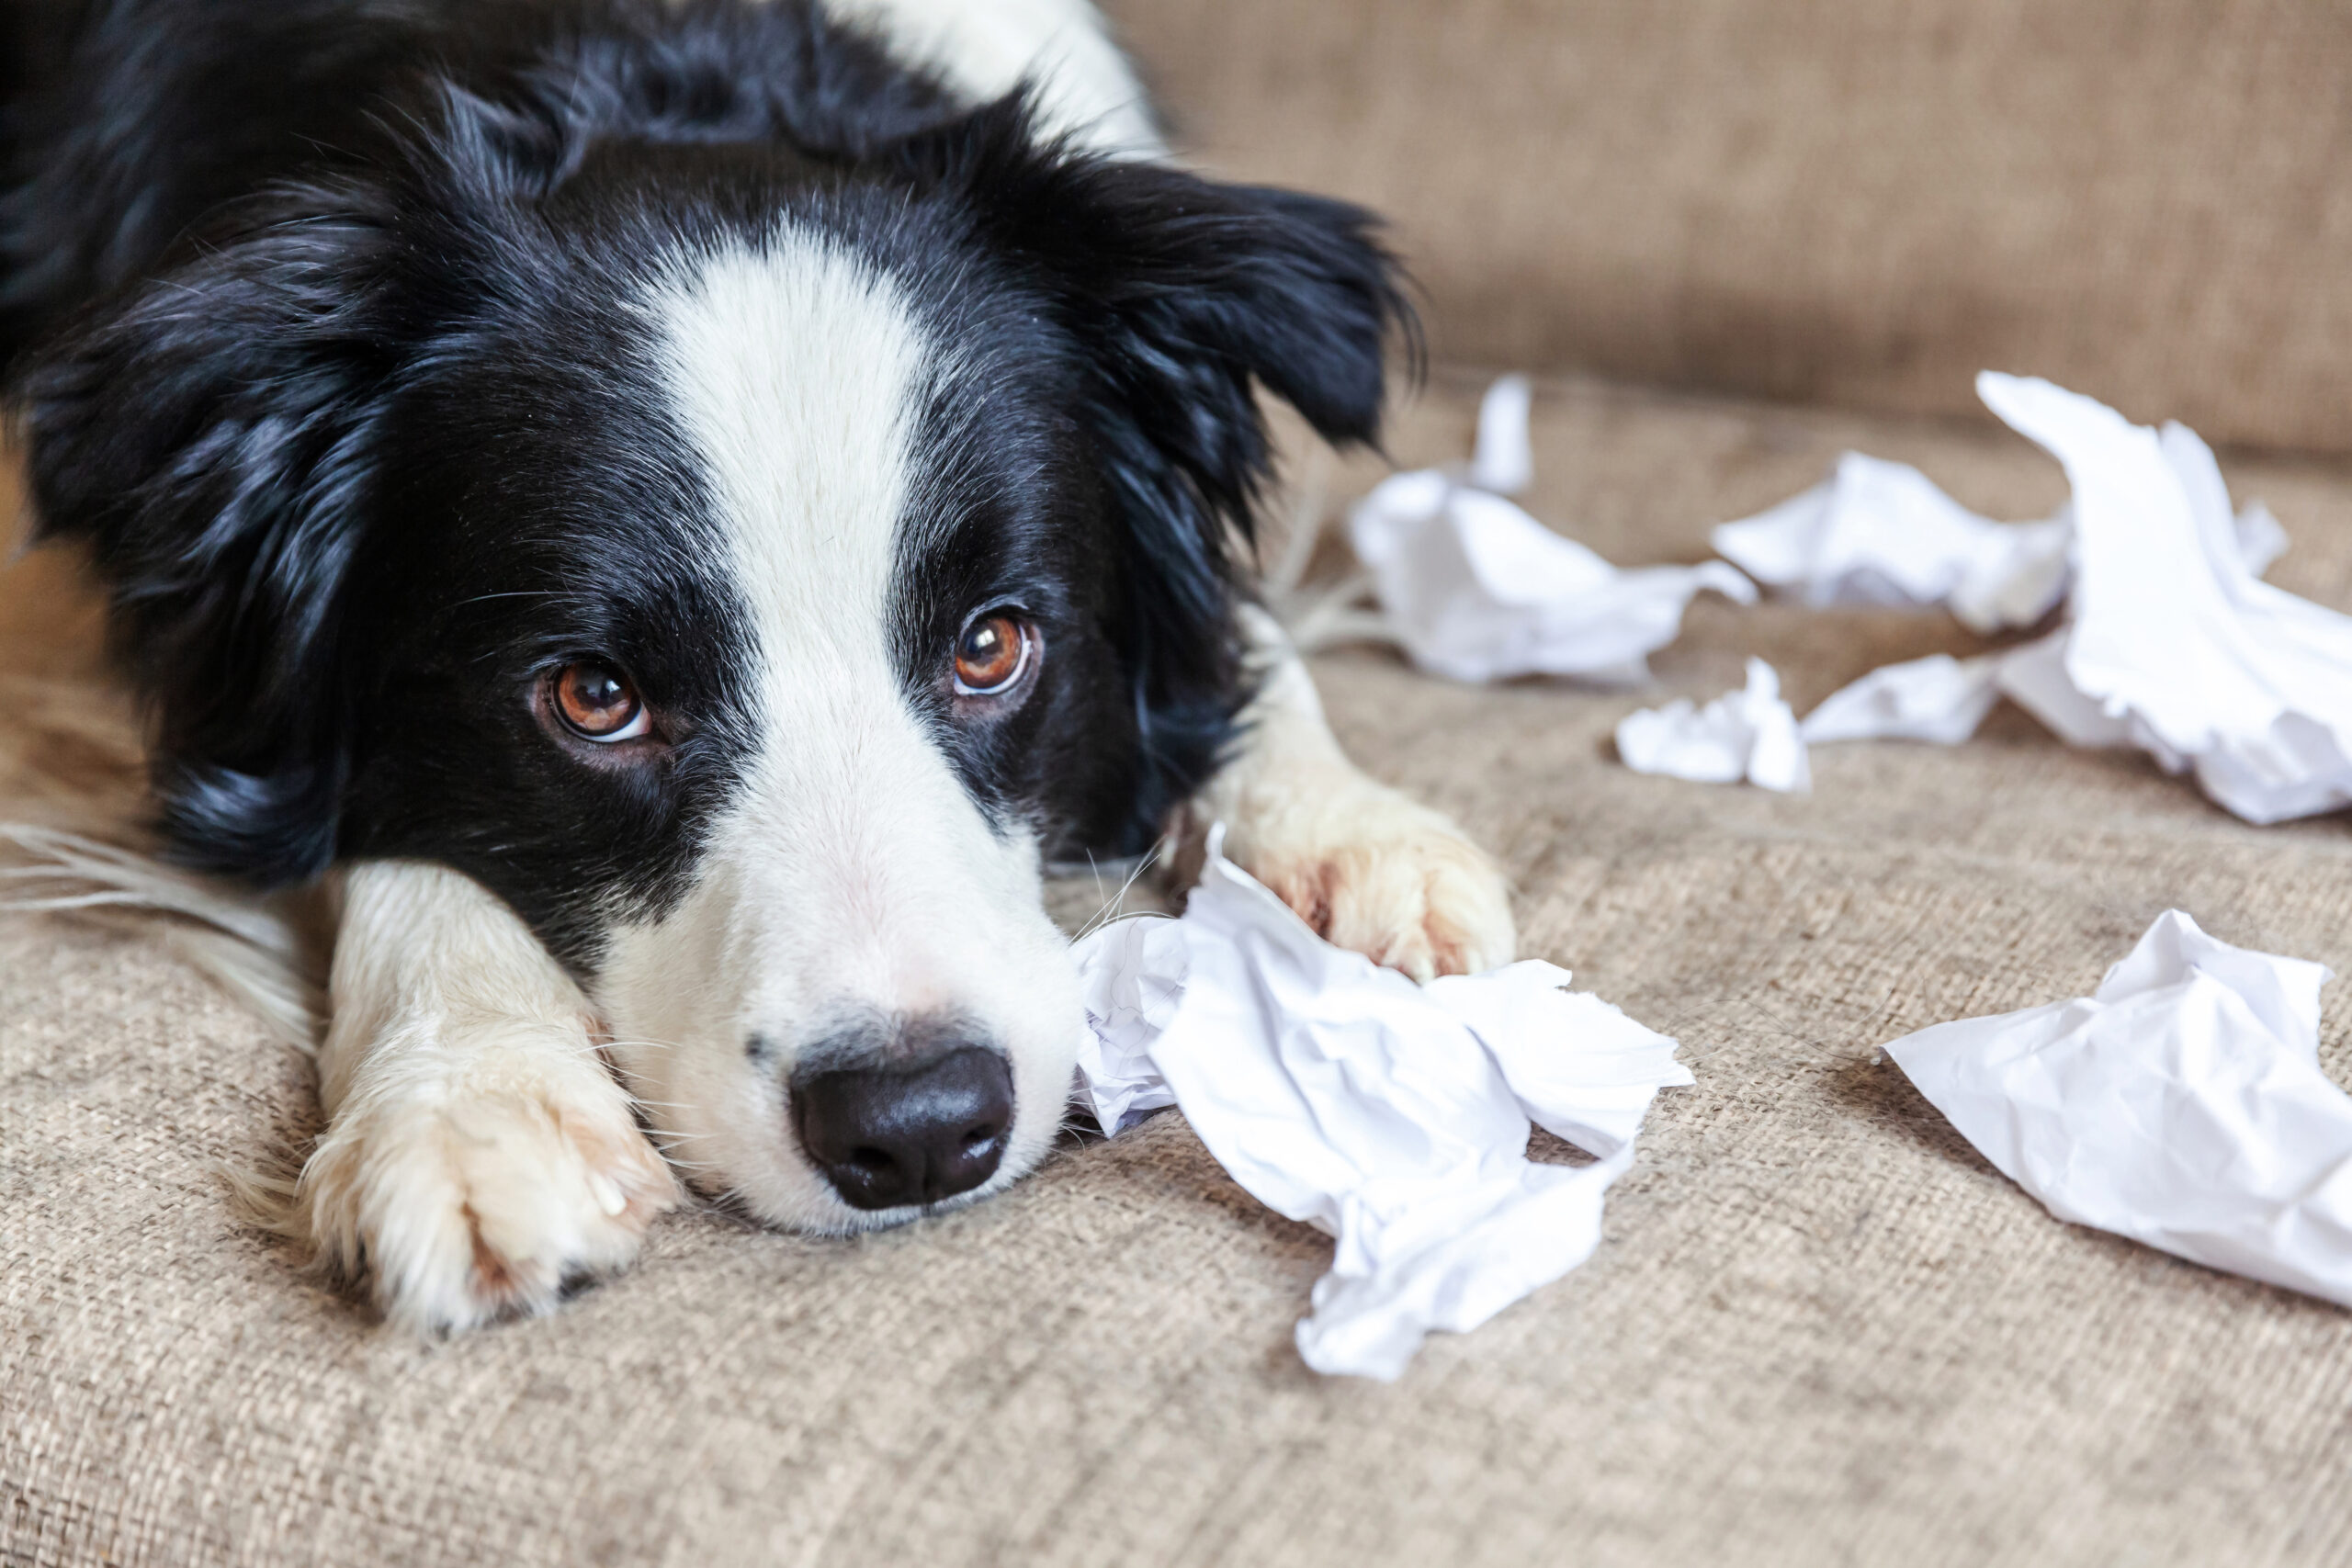 A black and white dog is lying on a couch with a guilty expression. There are pieces of toilet paper surrounding the dog.